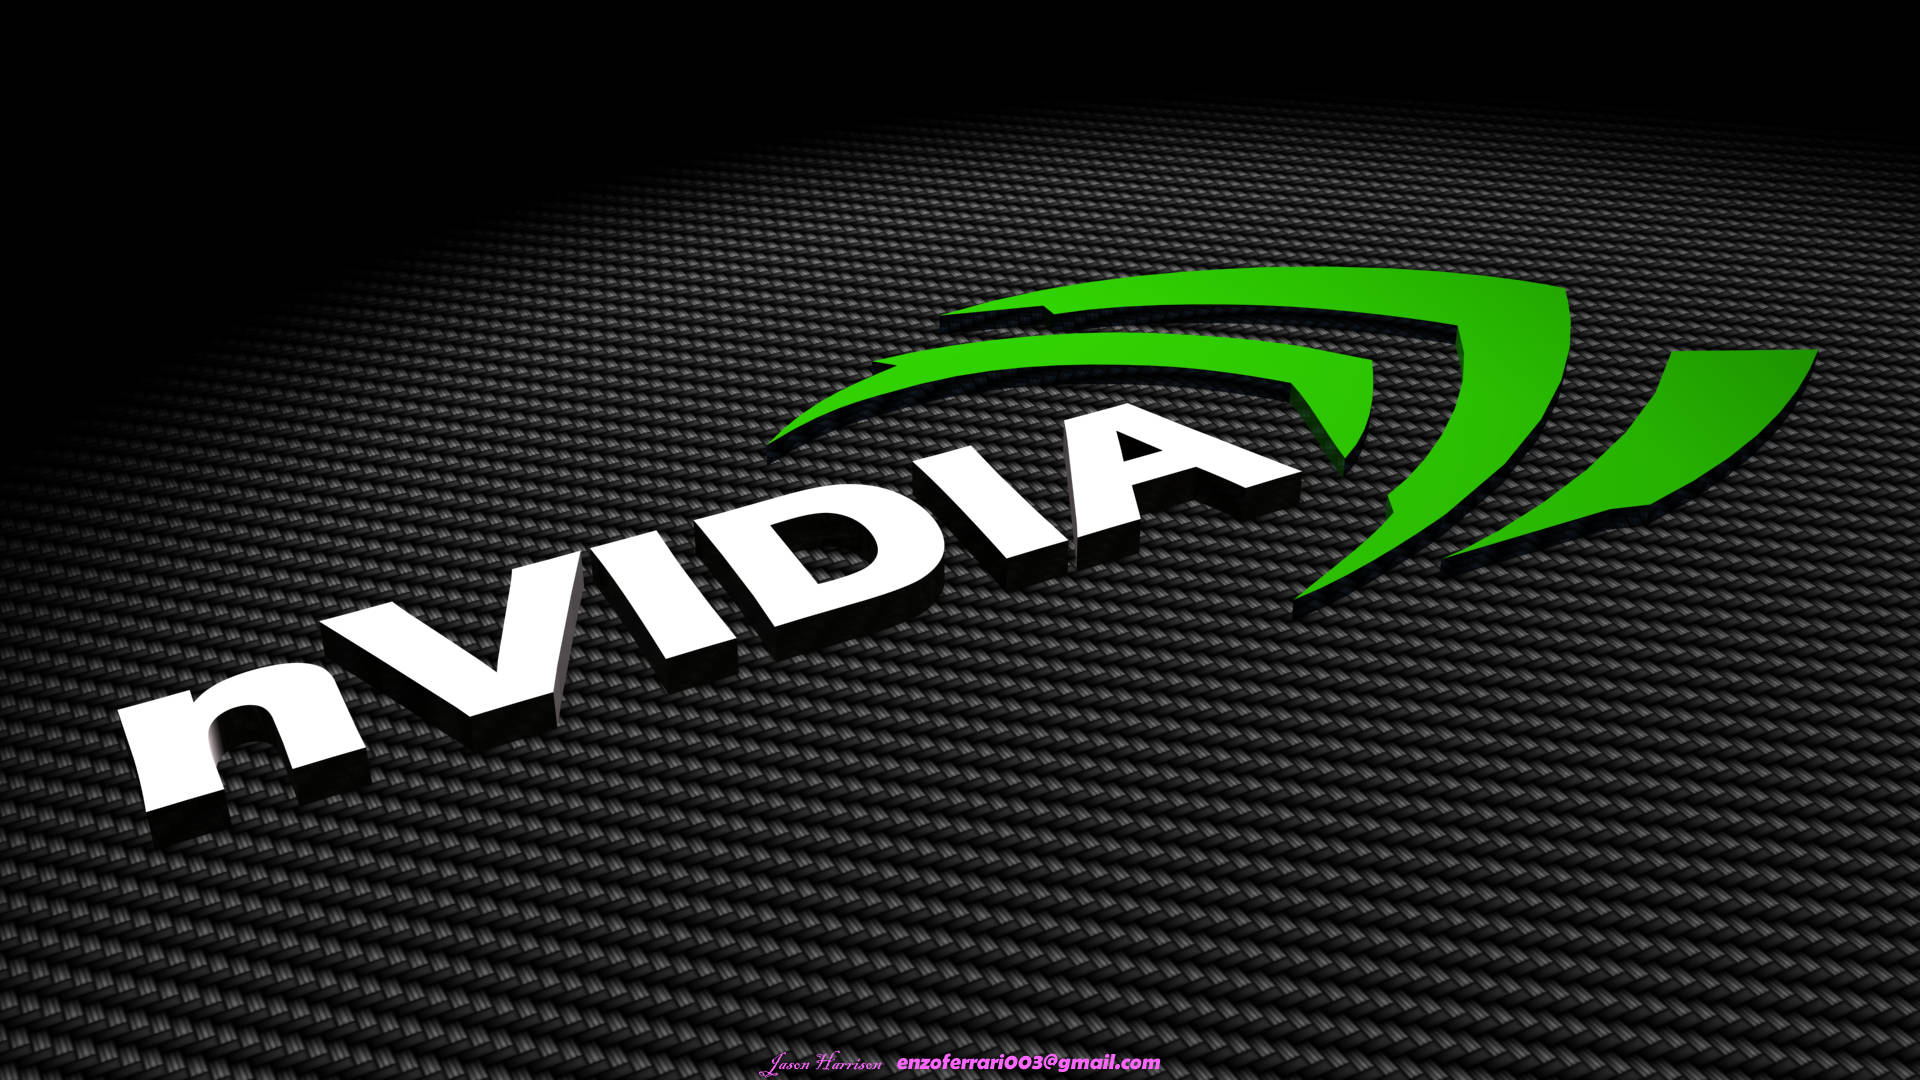 Nvidia 1920X1080 Wallpaper and Background Image